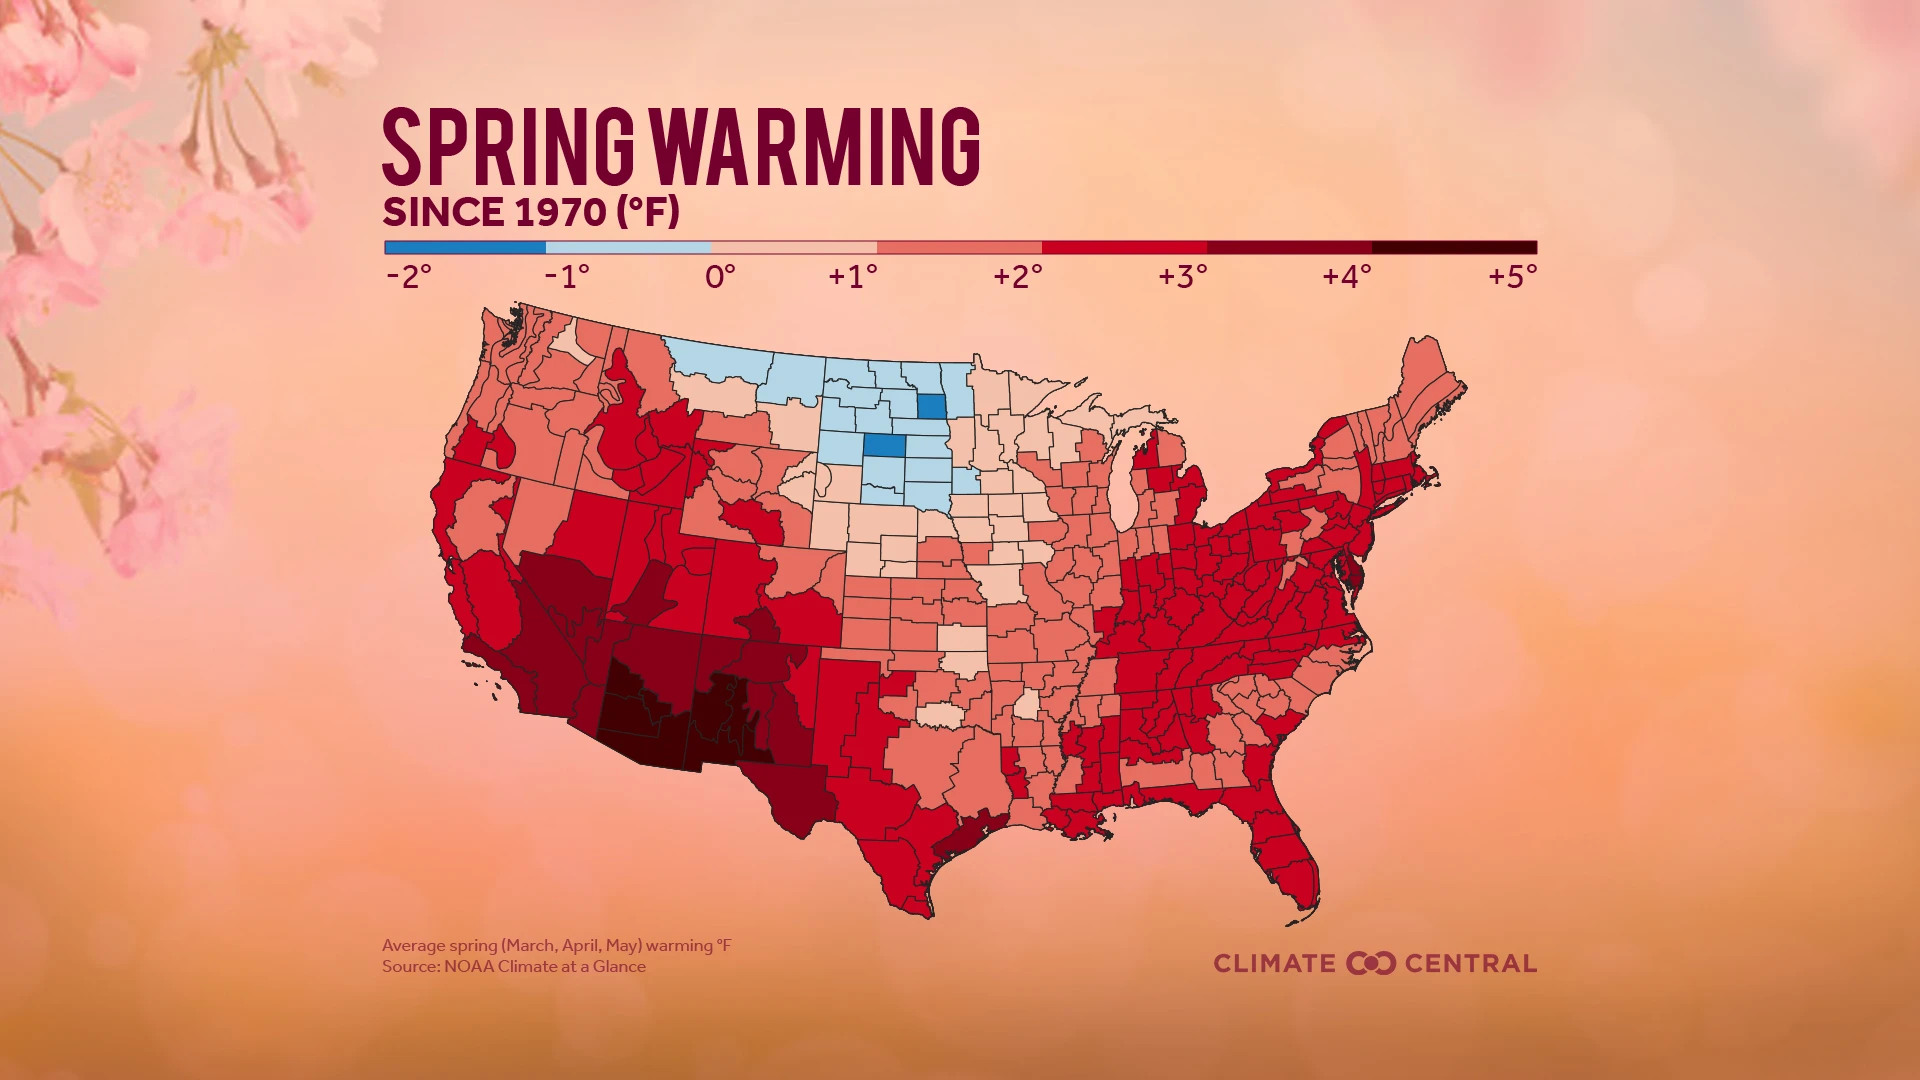 Spring season continues to warm at a fast pace across much of the U.S.